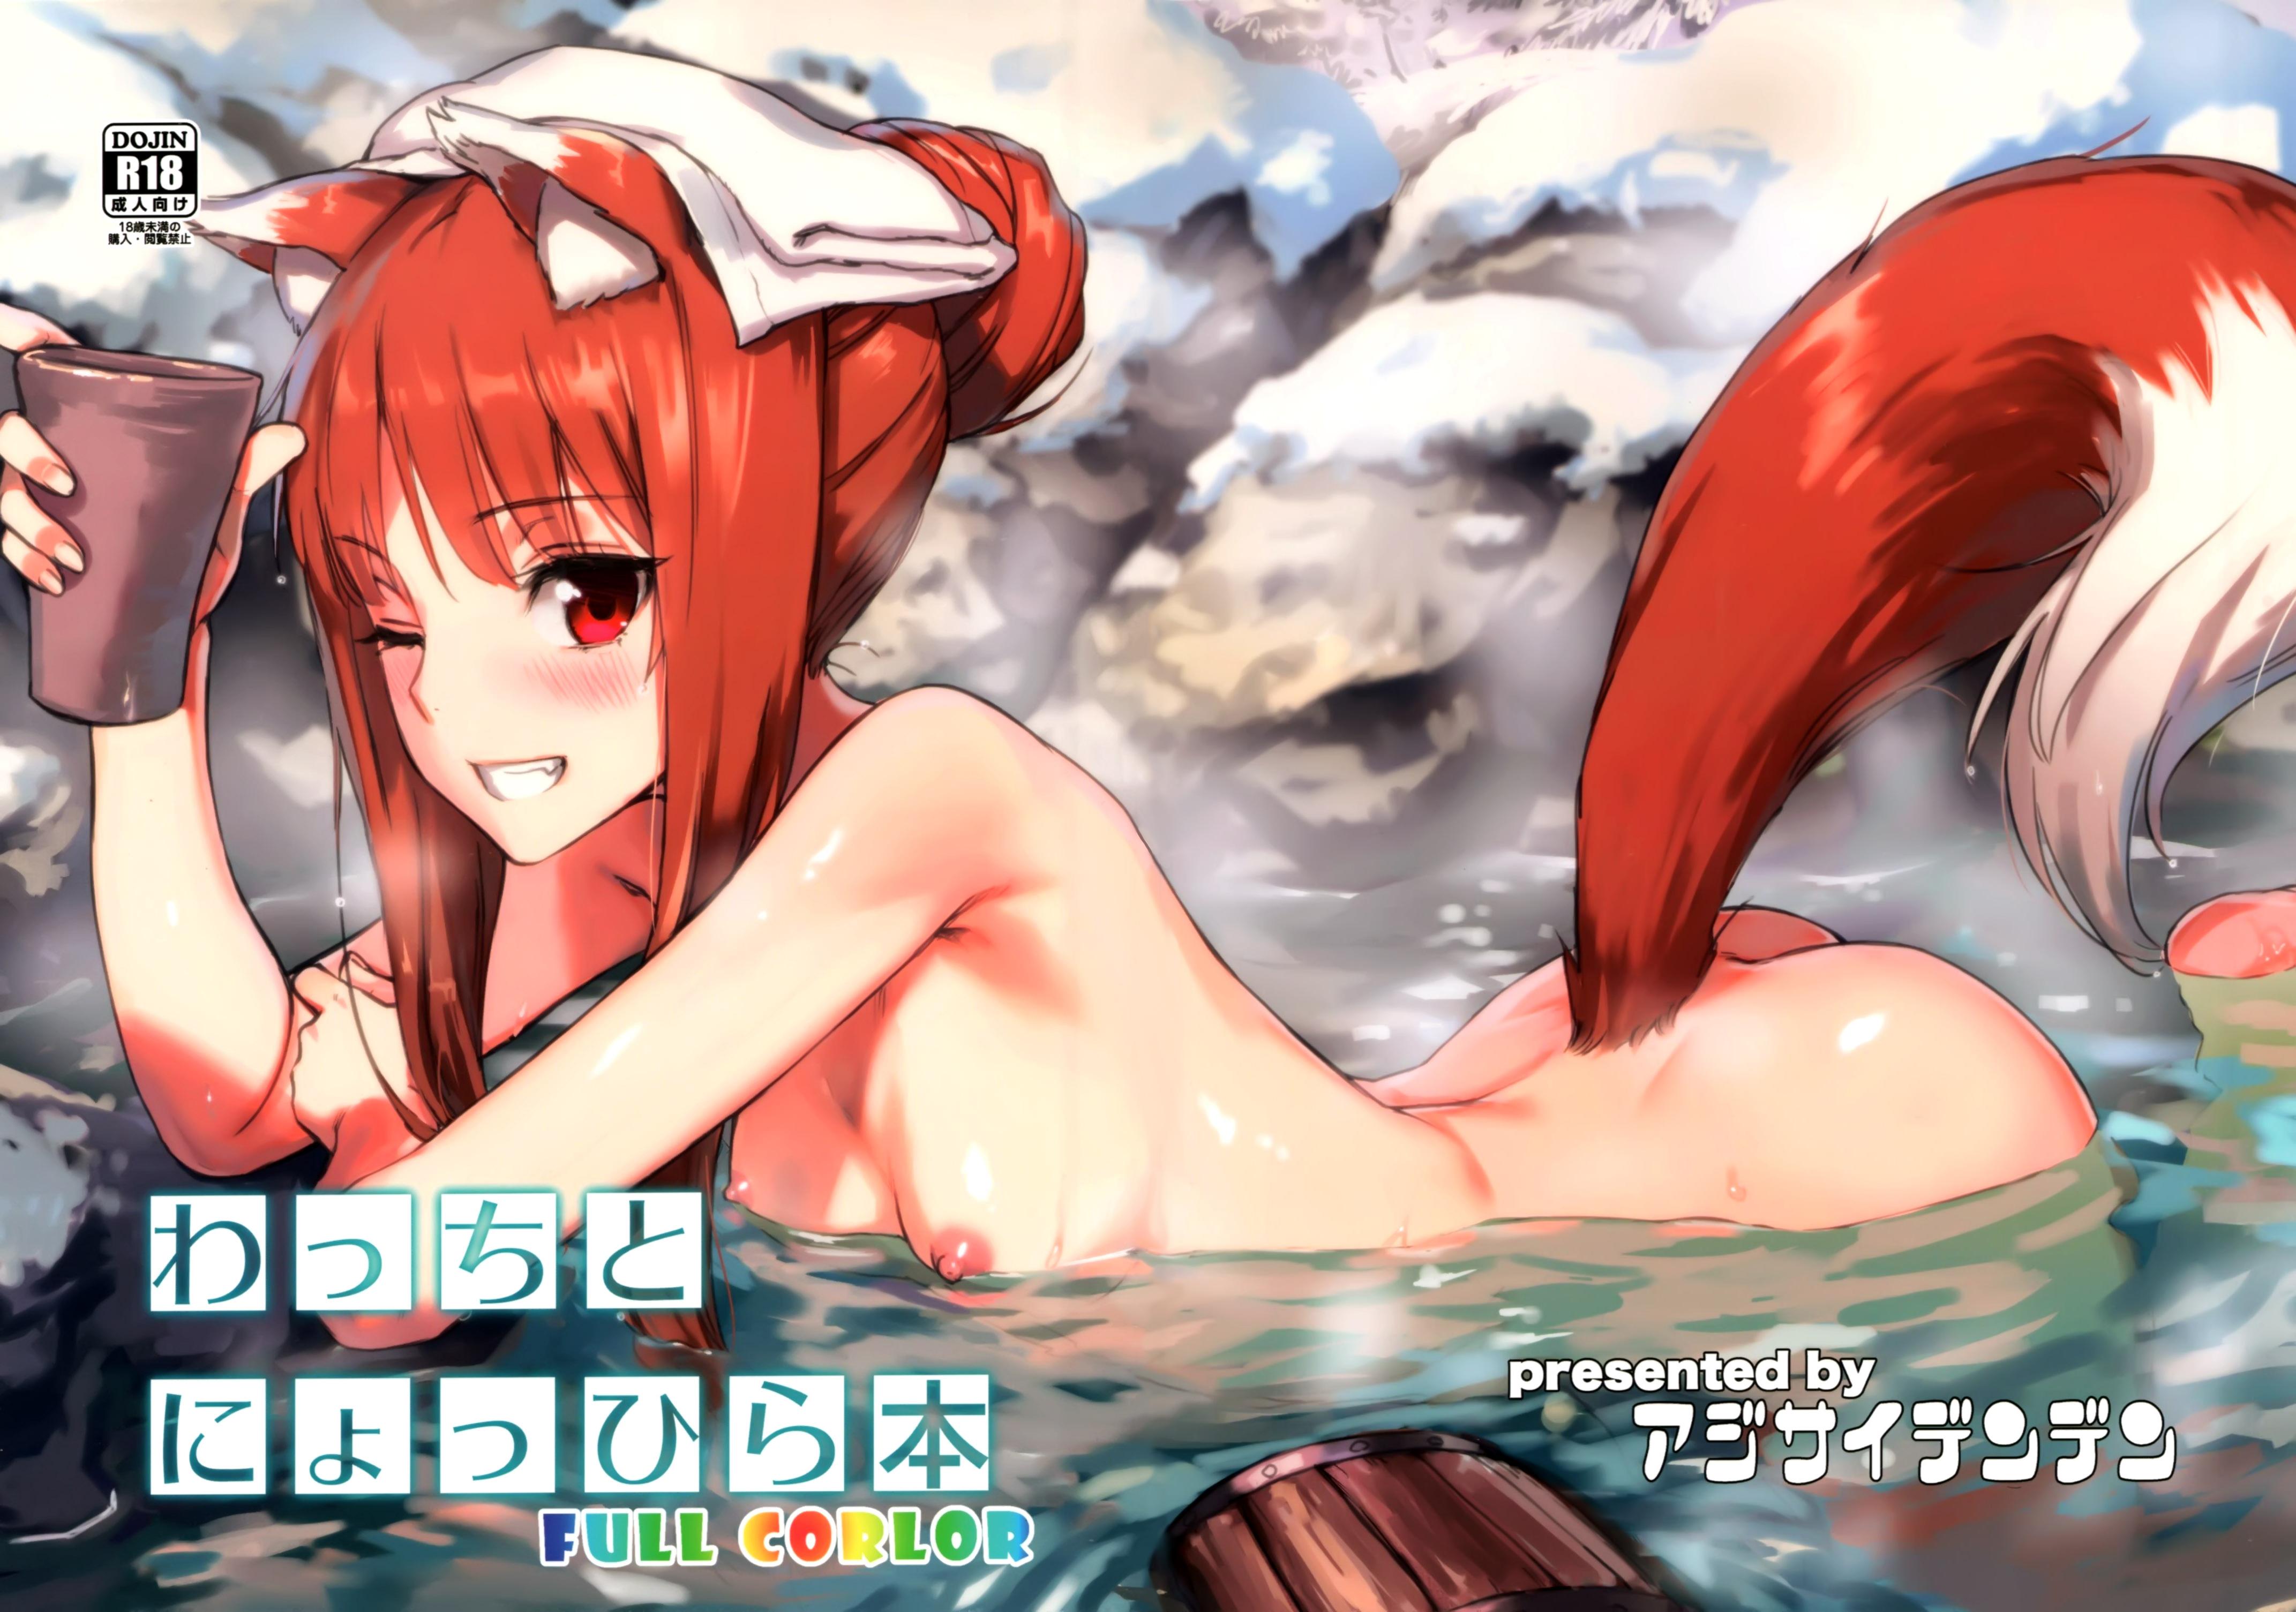 Caliente Wacchi to Nyohhira Bon FULL COLOR - Spice and wolf Teen Porn - Page 2